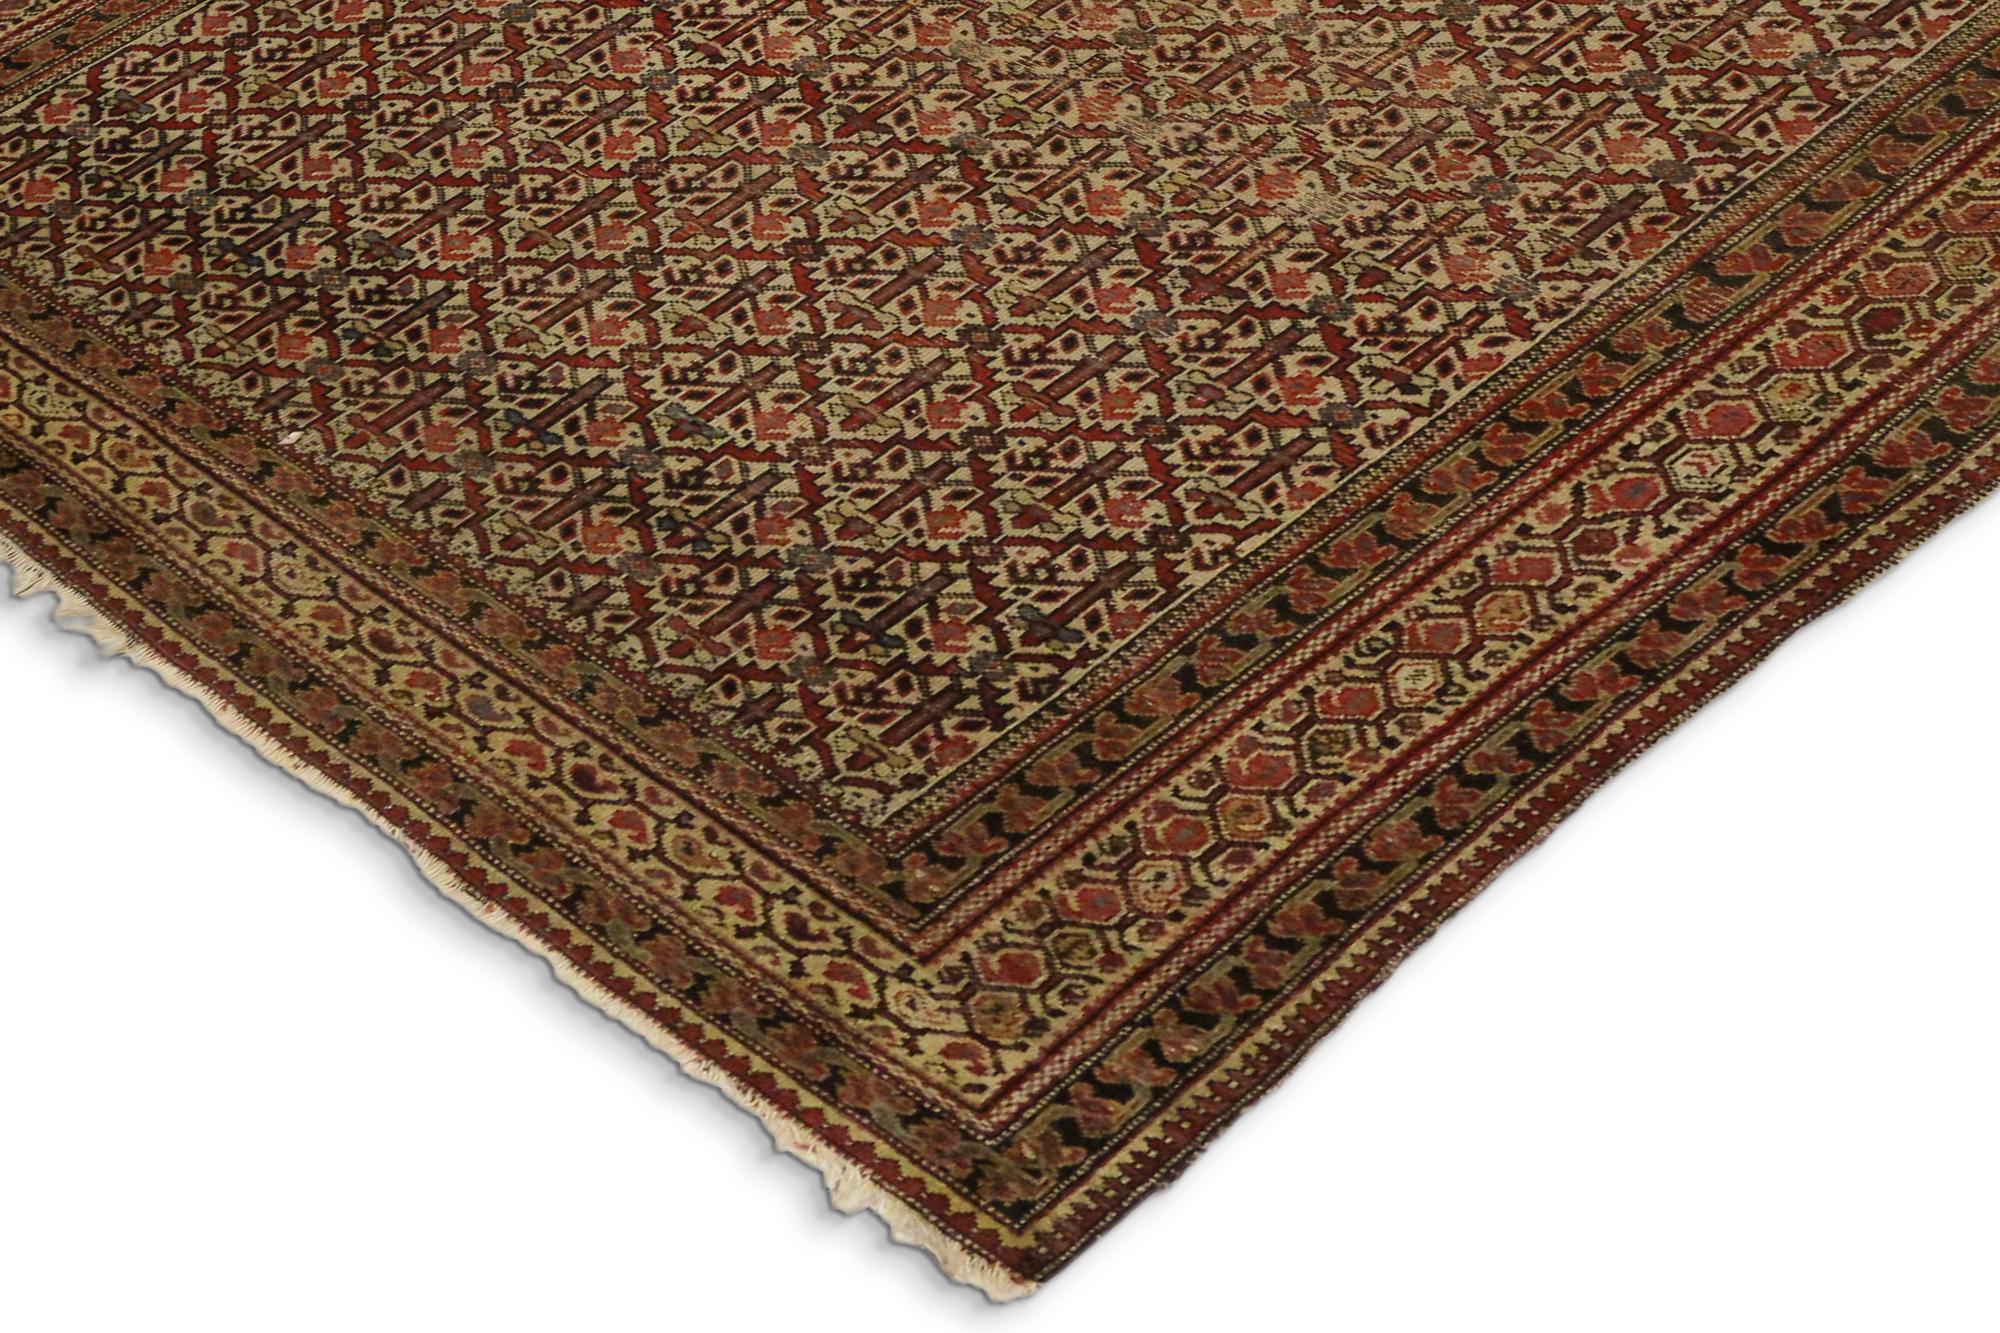 Wool Distressed Antique Malayer Persian Area Rug with Industrial Rustic Style For Sale